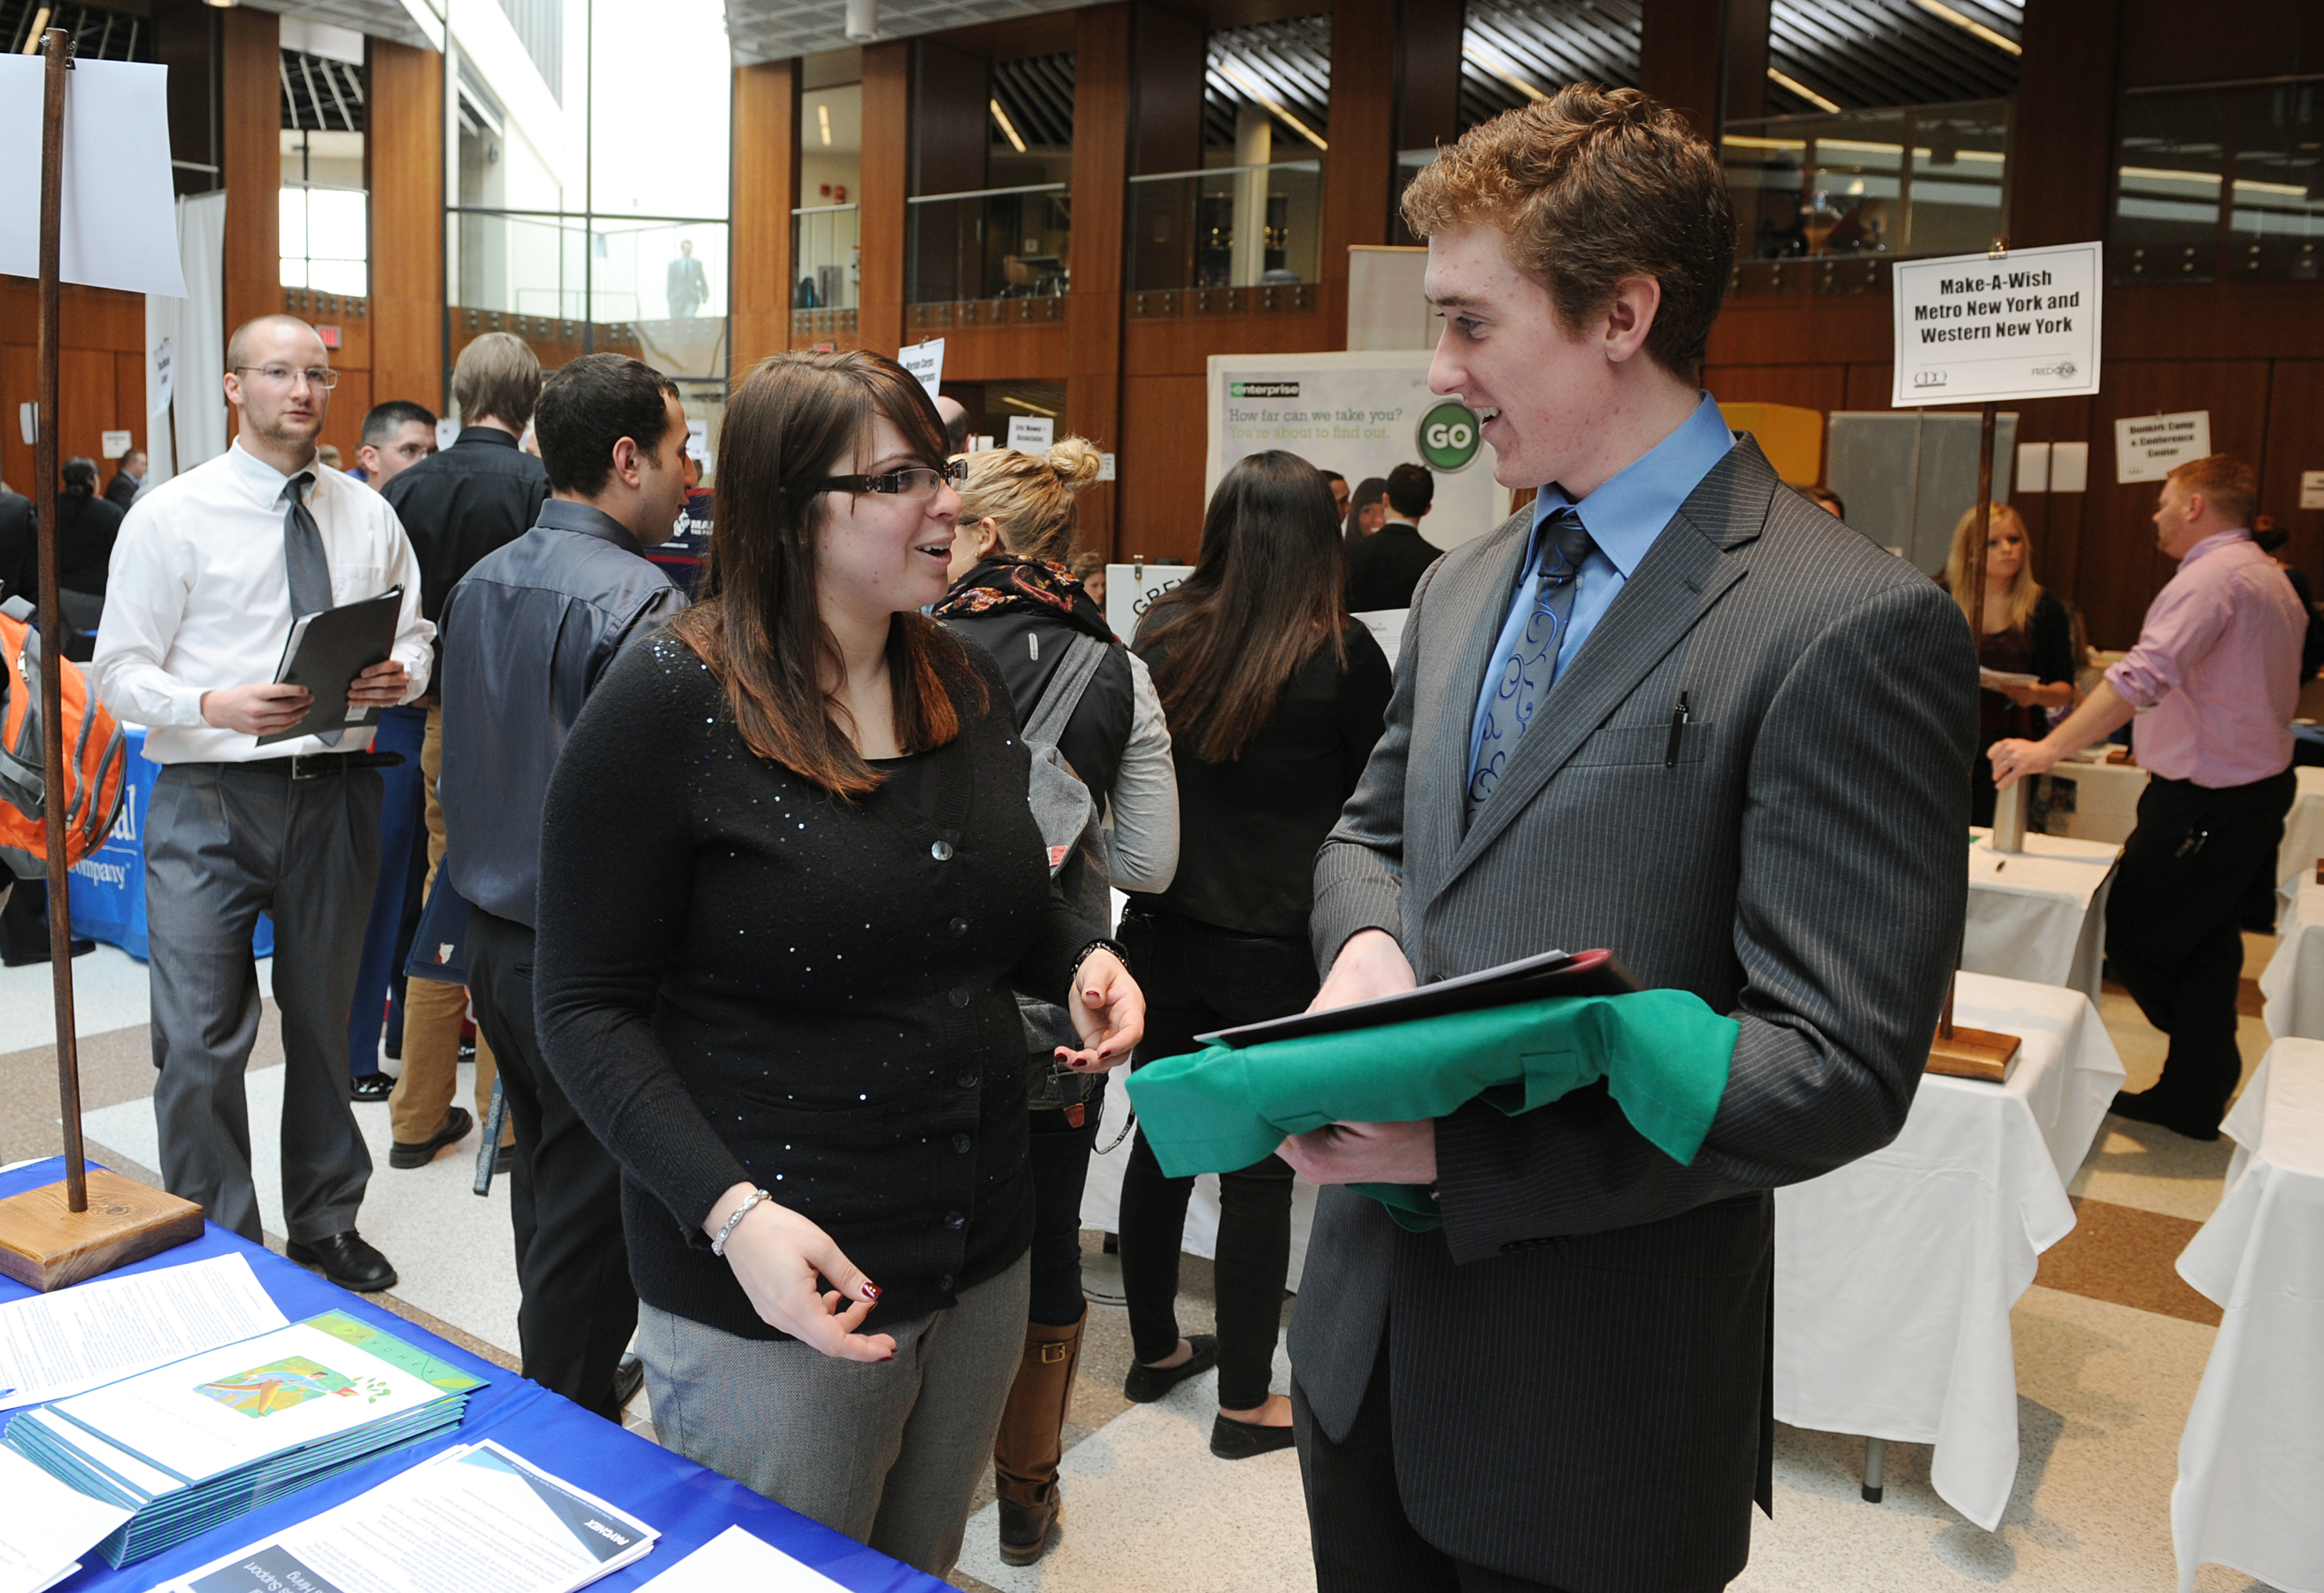 Our Job and Internship Expo is a great way to talk to students directly